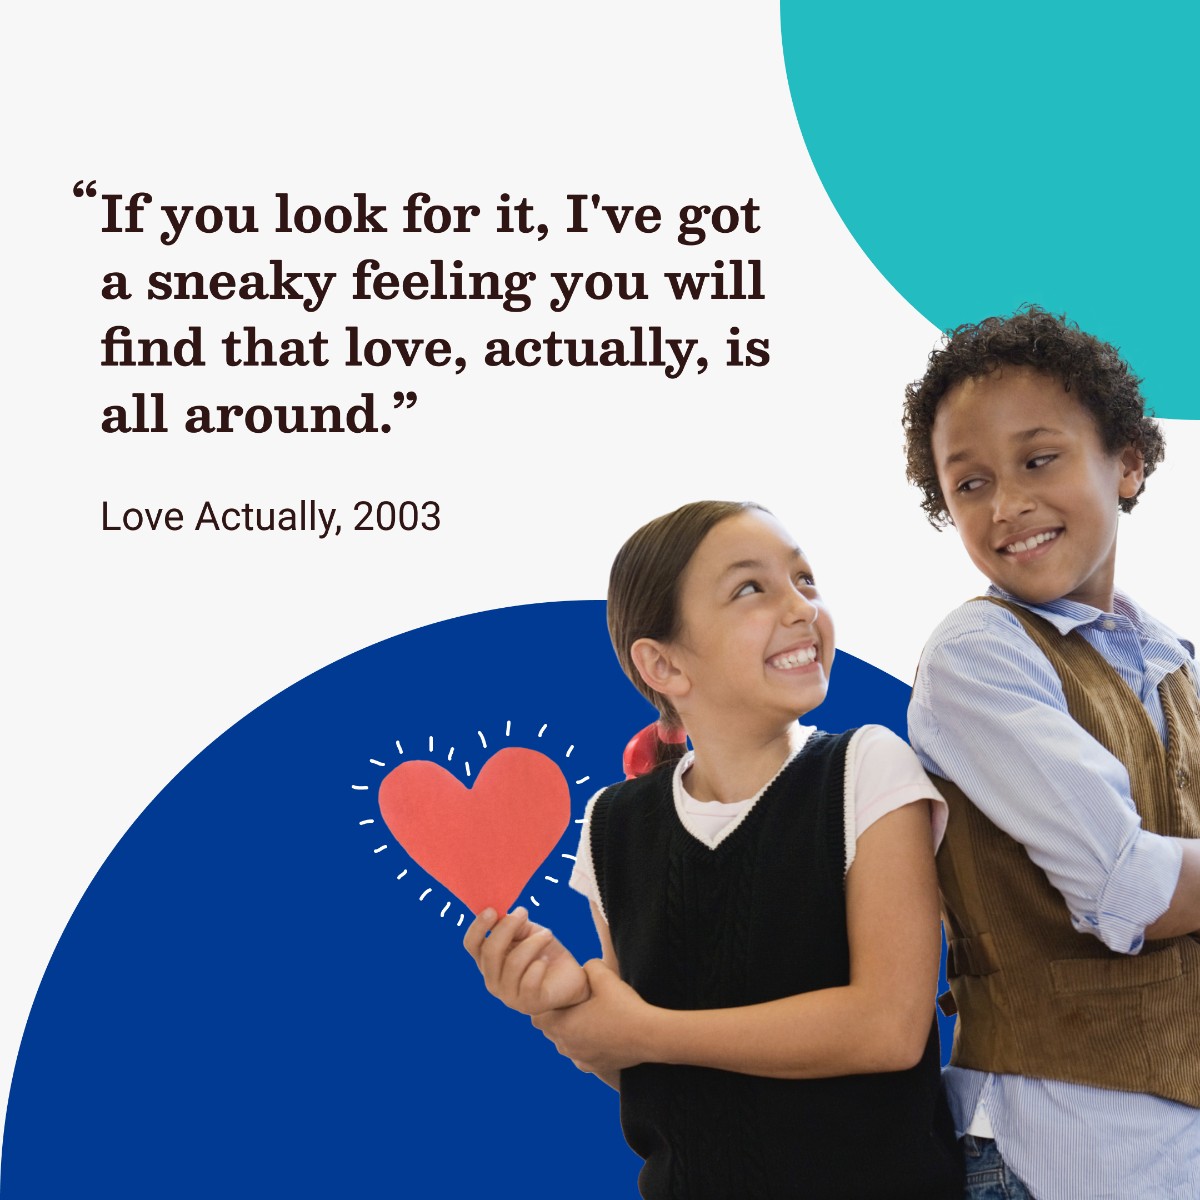 Spread the love this Valentine's Day! ❤️ Share your heartwarming moments celebrating love and friendship with your students. #TeacherValentines #HappyValentinesDay